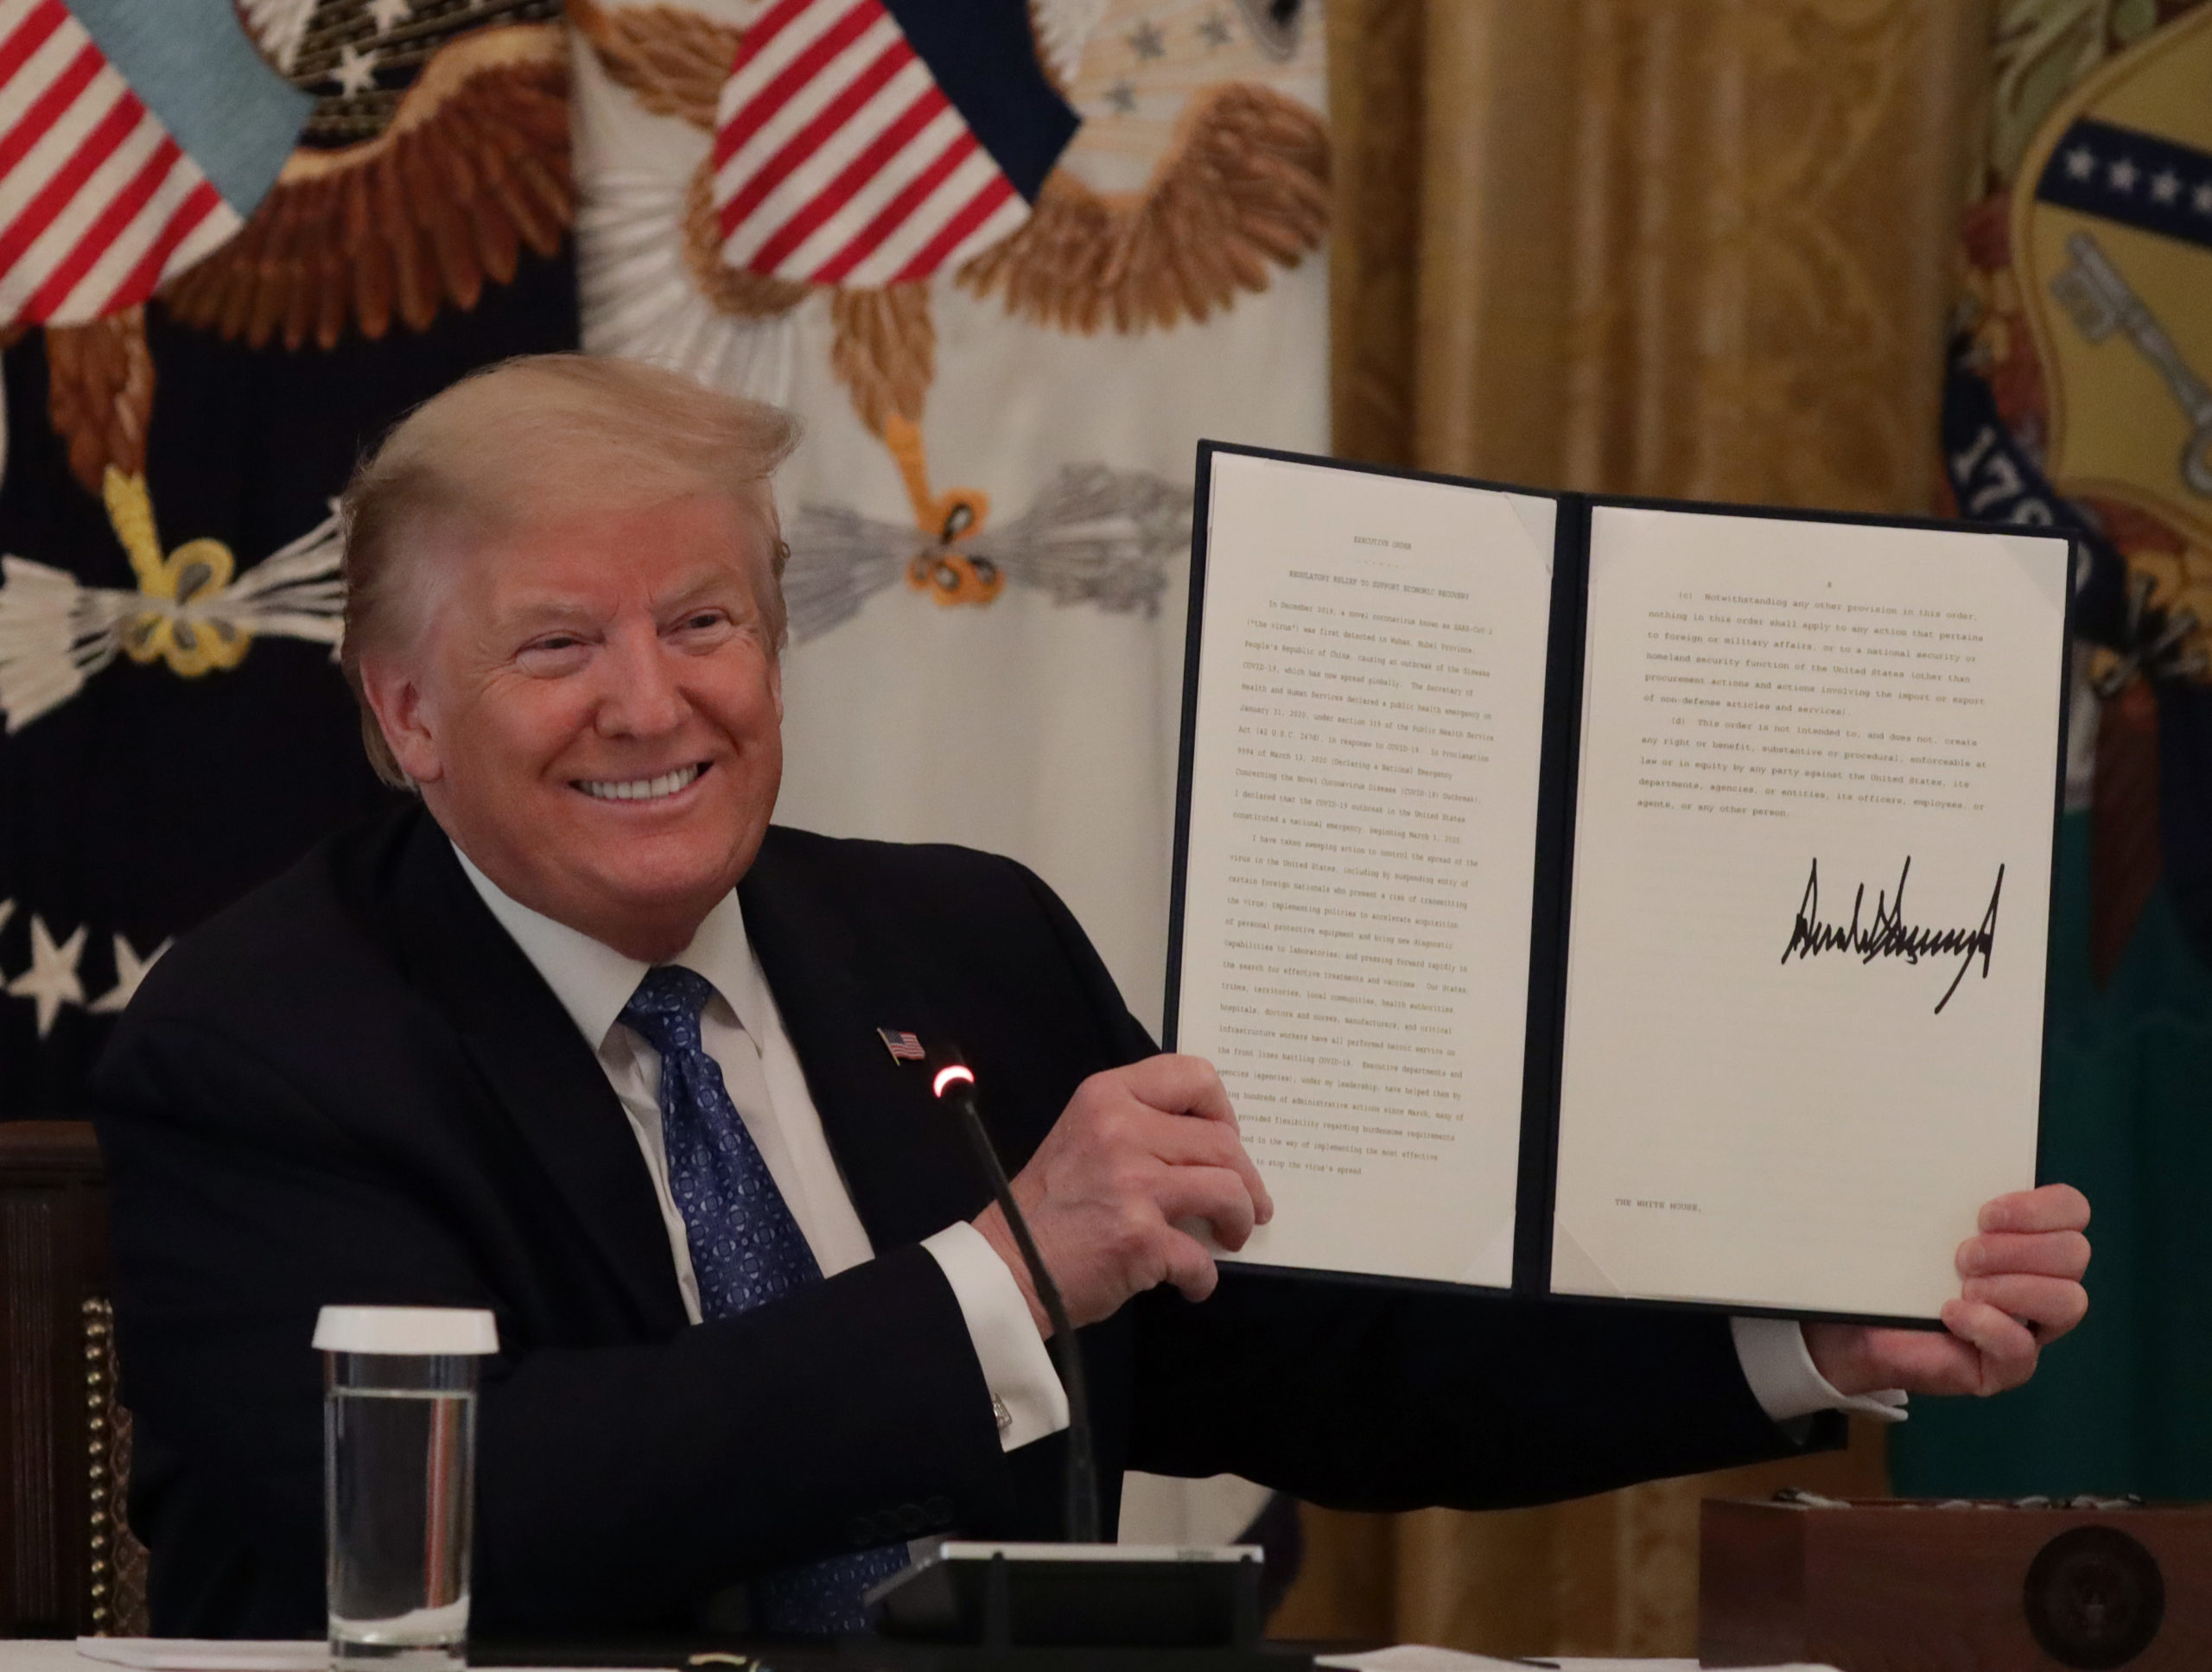 WASHINGTON, DC - MAY 19: U.S. President Donald Trump holds up a copy of an executive order he signed on DOT deregulation, during a meeting with his cabinet in the East Room of the White House on May 19, 2020 in Washington, DC. (Photo by Alex Wong/Getty Images)